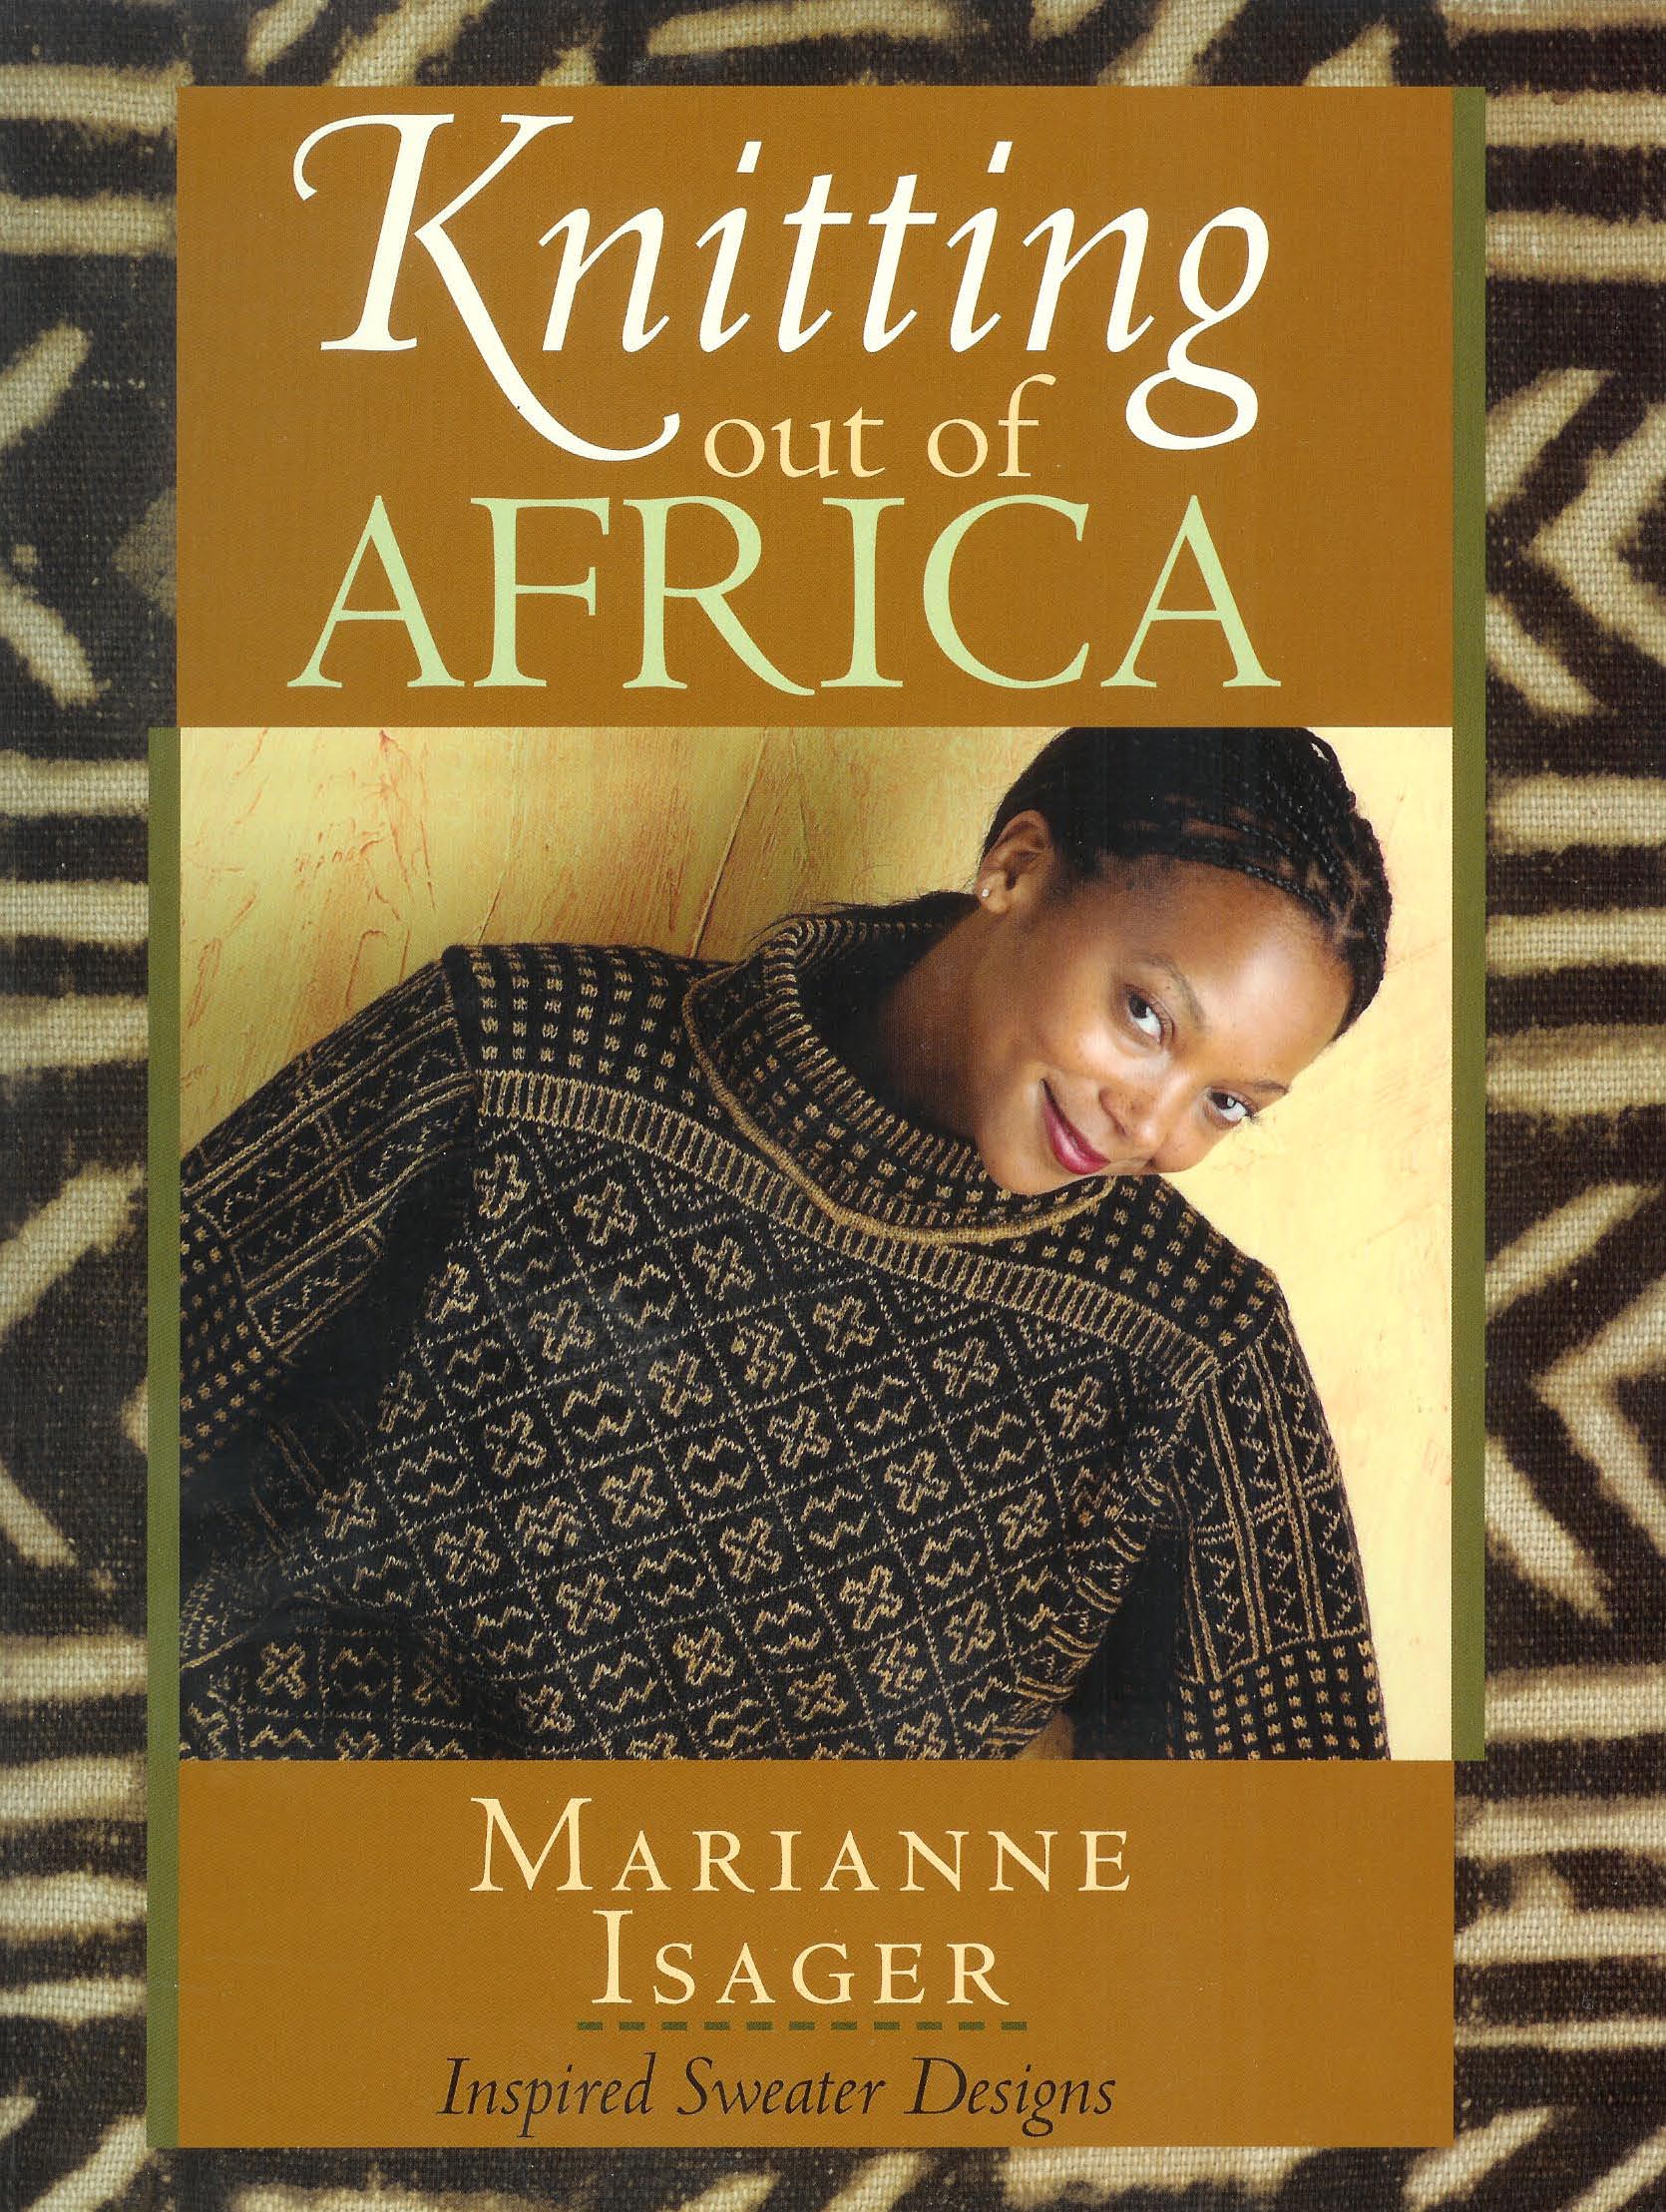 Knitting out of Africa